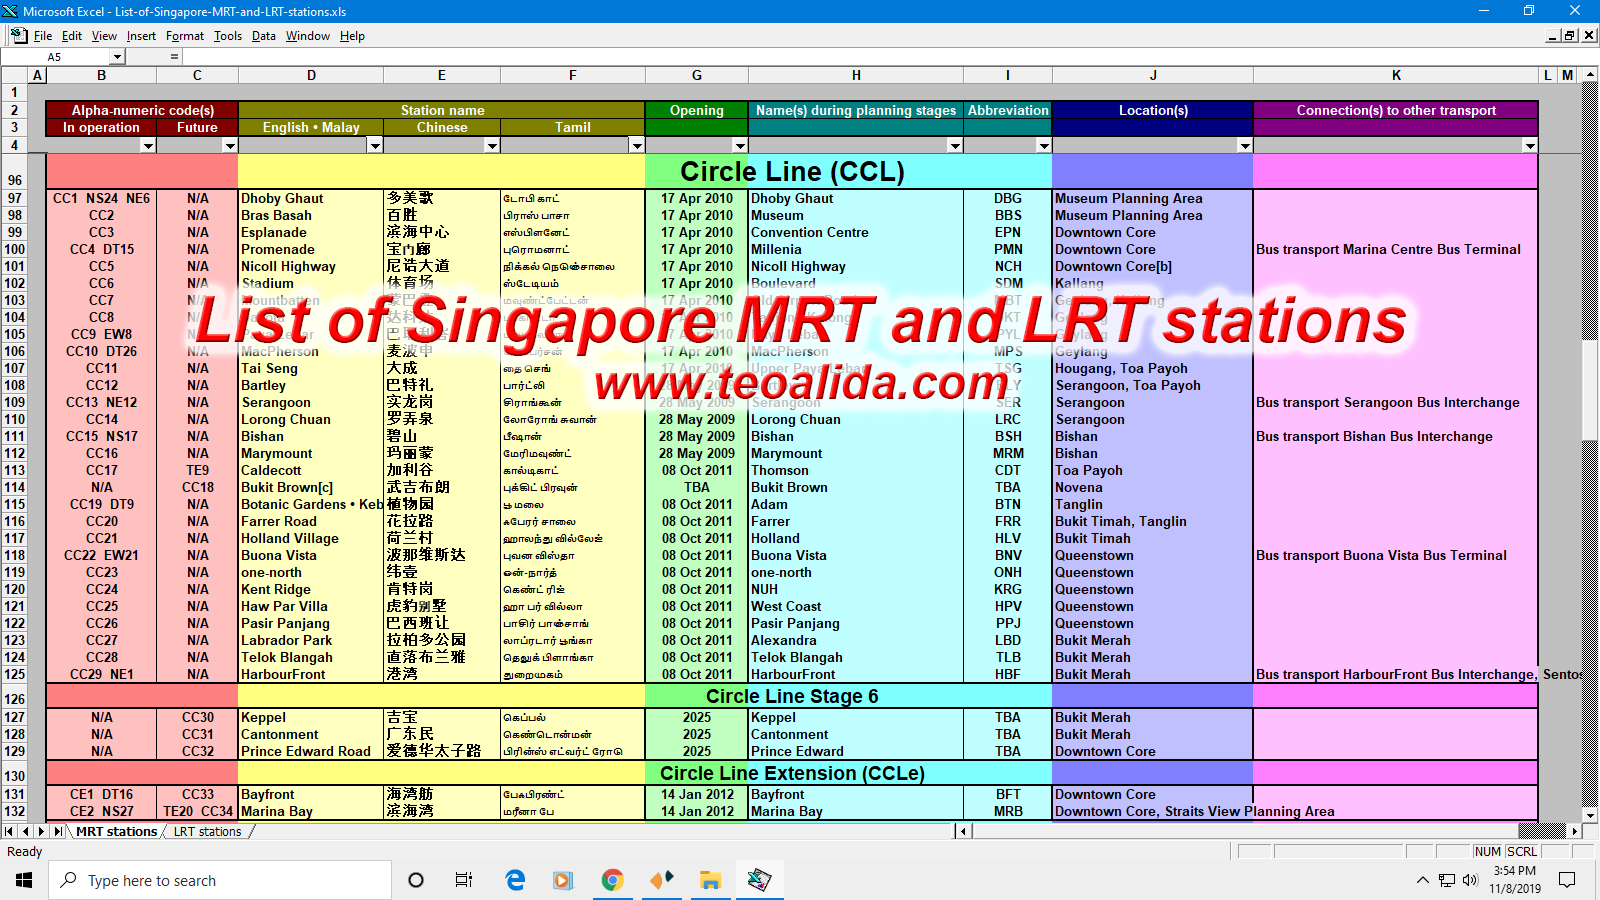 List of Singapore MRT and LRT stations.png